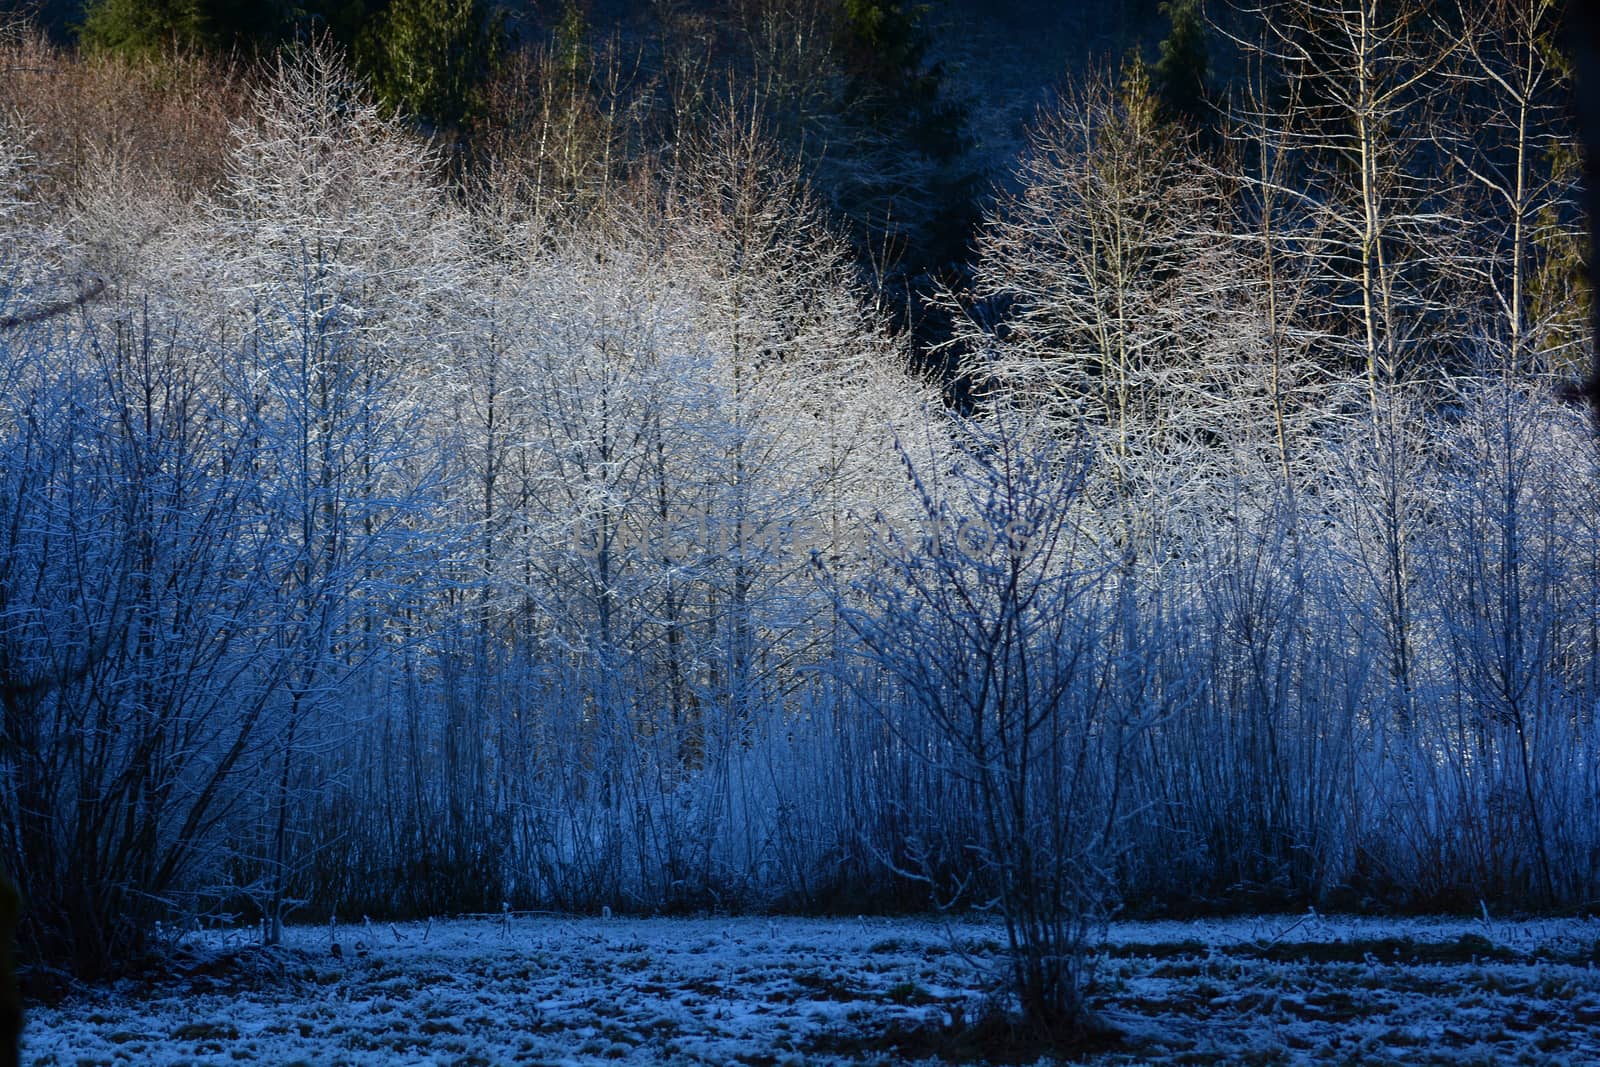 Morning Frost on Bare Trees by cestes001